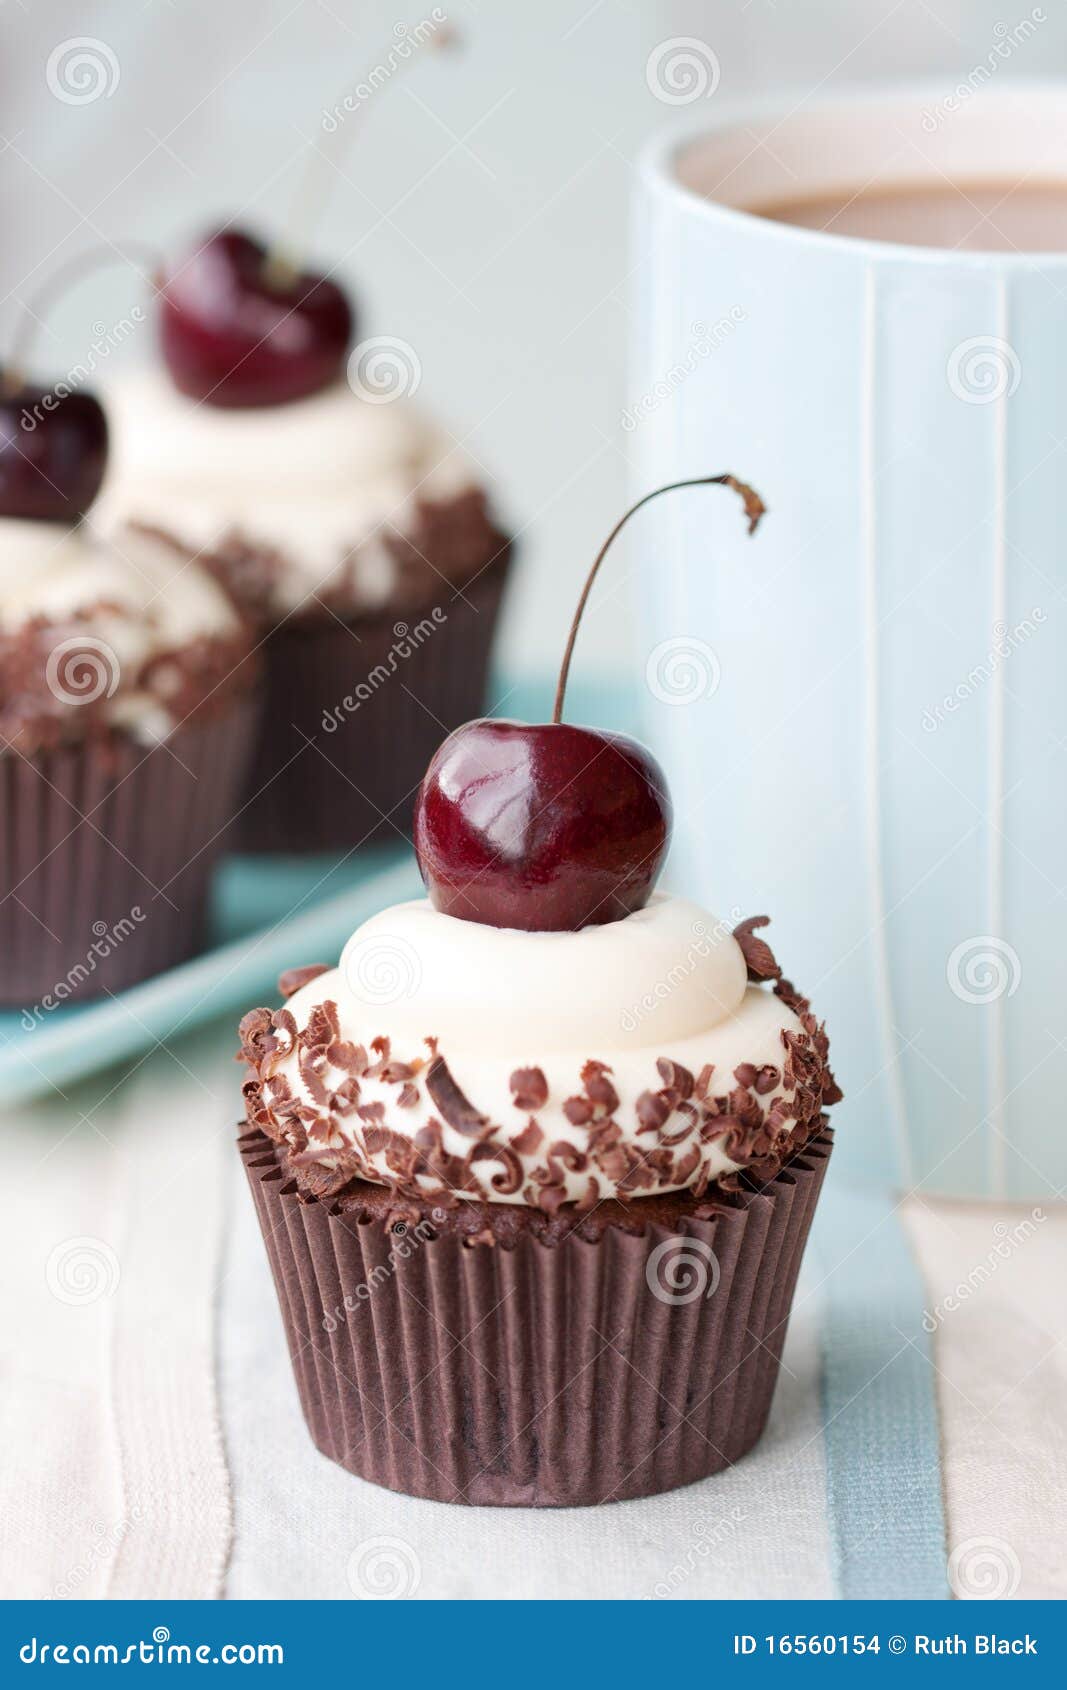 black forest cupcakes in german